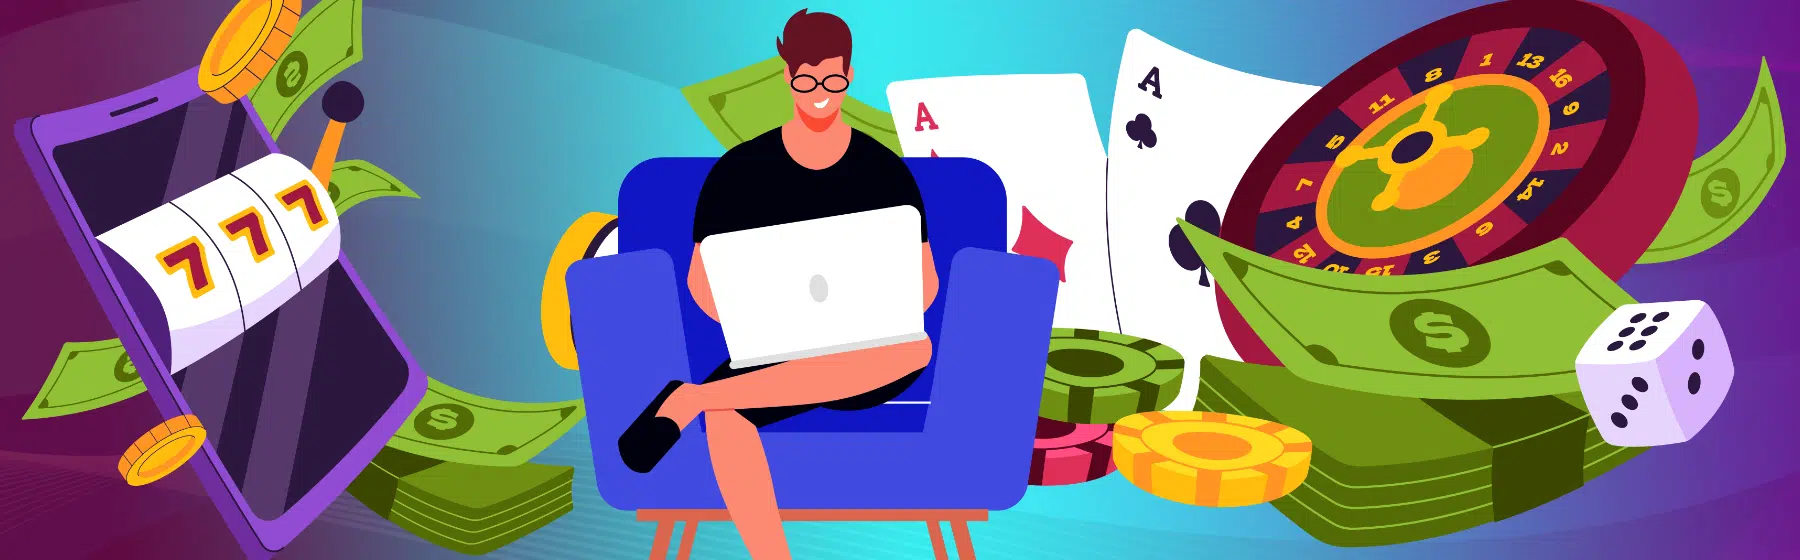 a man is sitting on a chair with a laptop, and behind him is a mobile phone with a jackpot, money, and cards